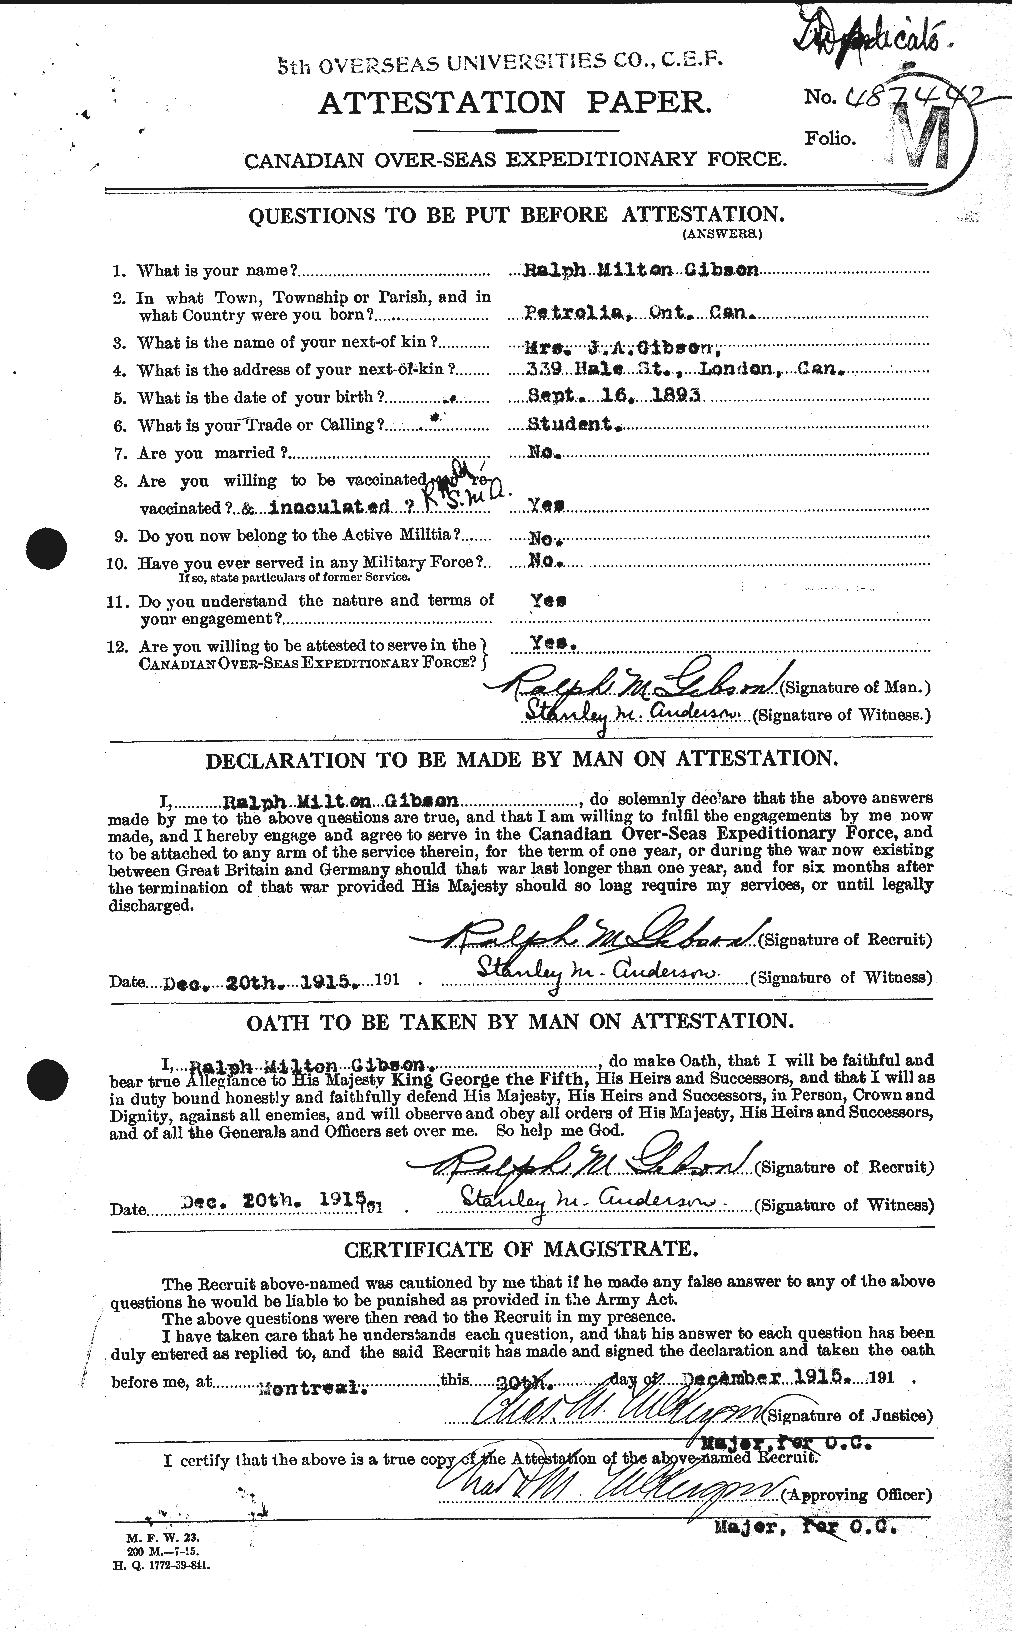 Personnel Records of the First World War - CEF 350619a